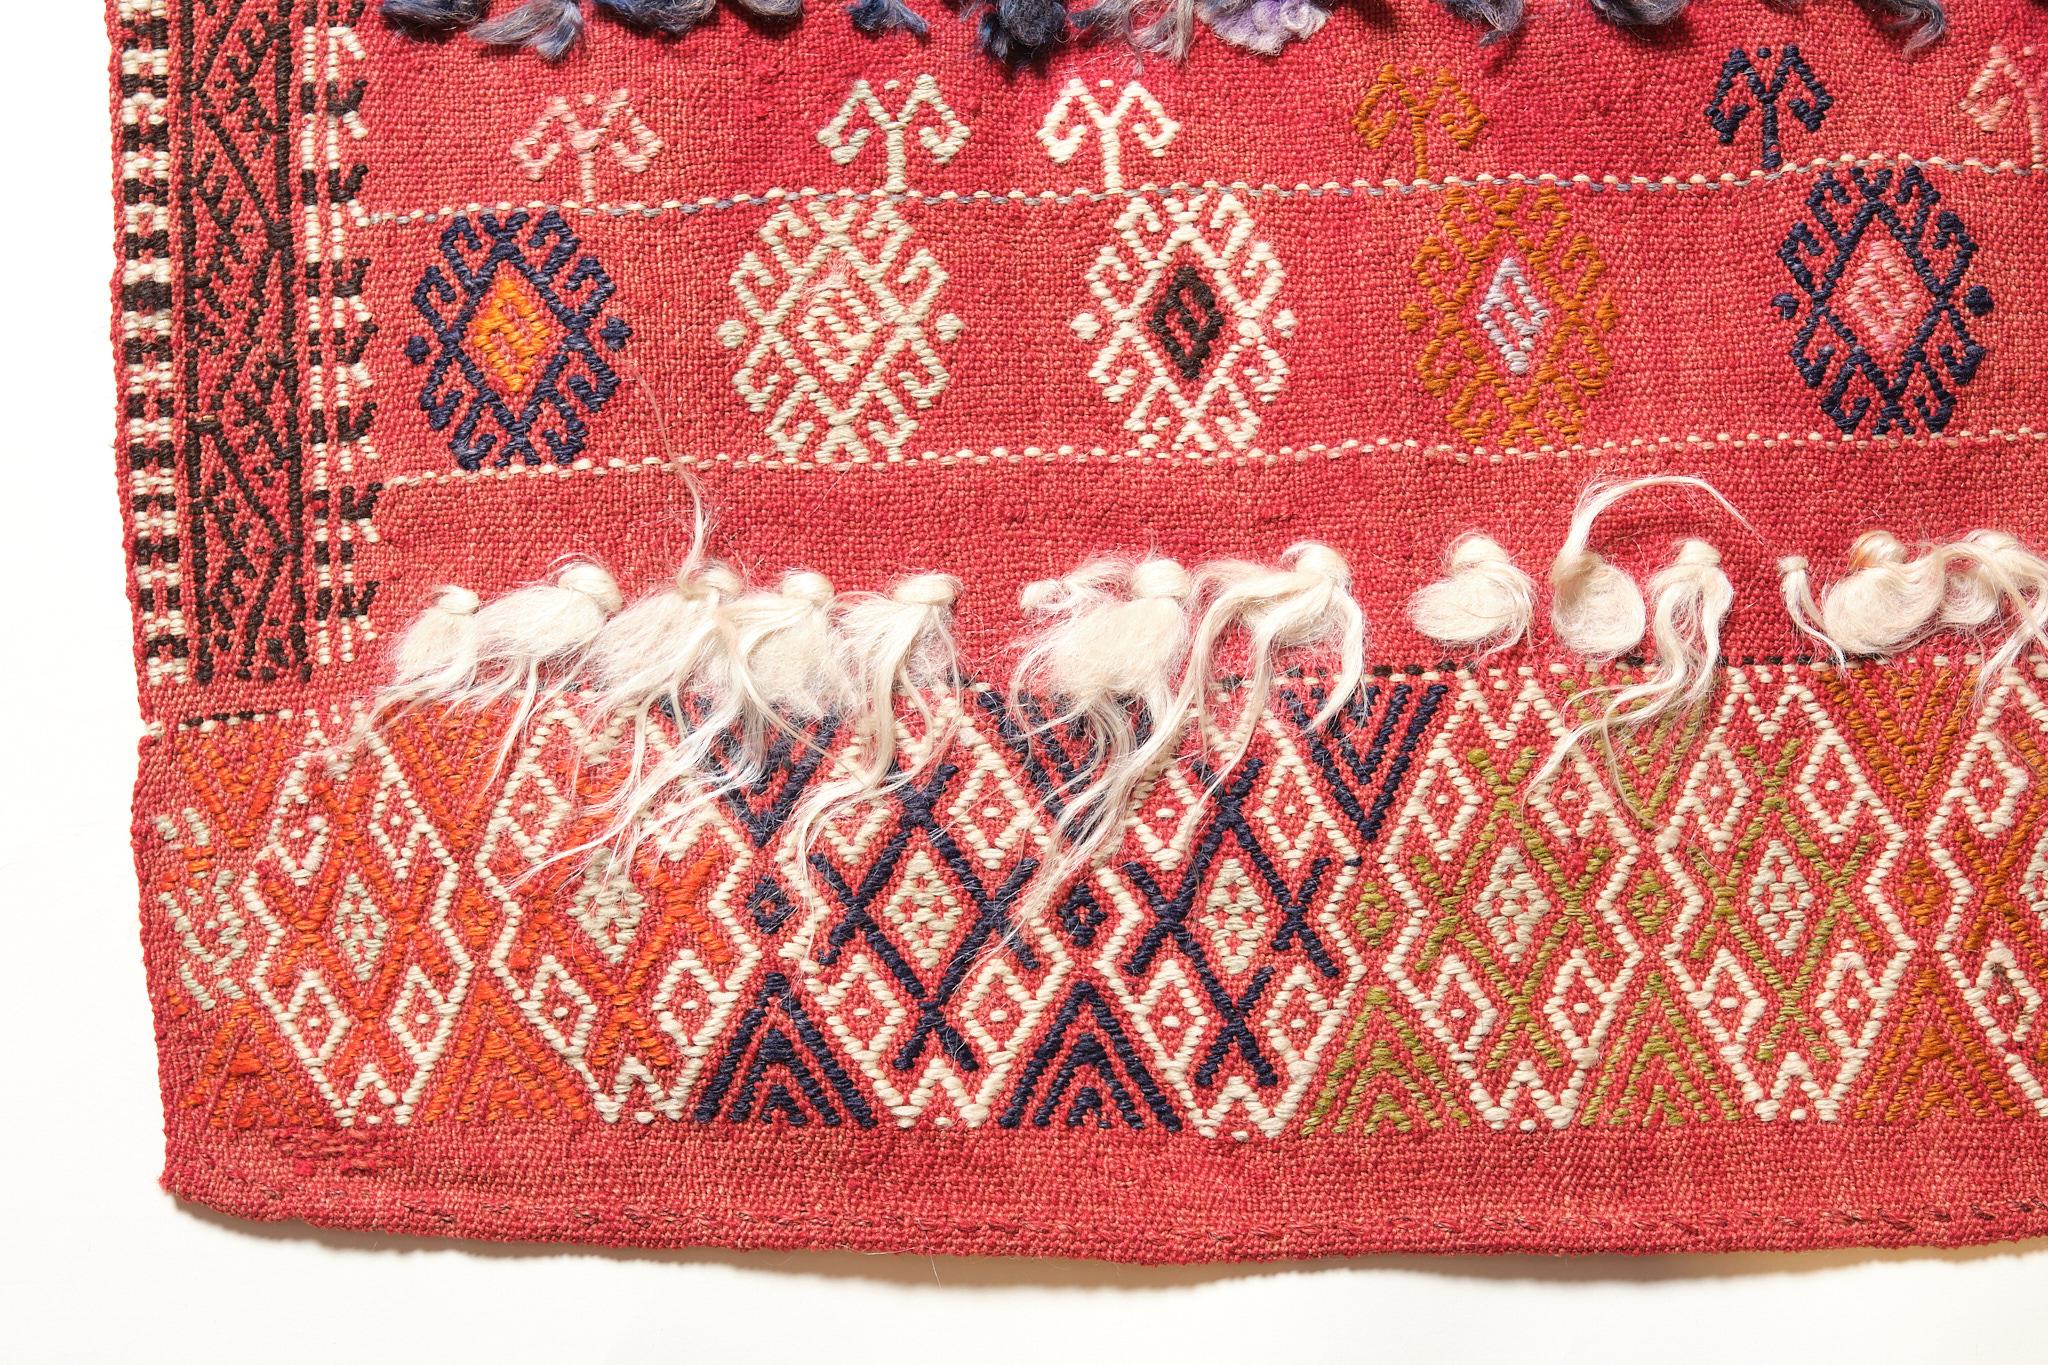 This is an Eastern Anatolian vintage made in two halves of old Cecim ( Cicim or Jijim) Kilim from the Gaziantep region with a rare and beautiful color composition.

This town lies in south-eastern Turkey, close to the Syrian border and the